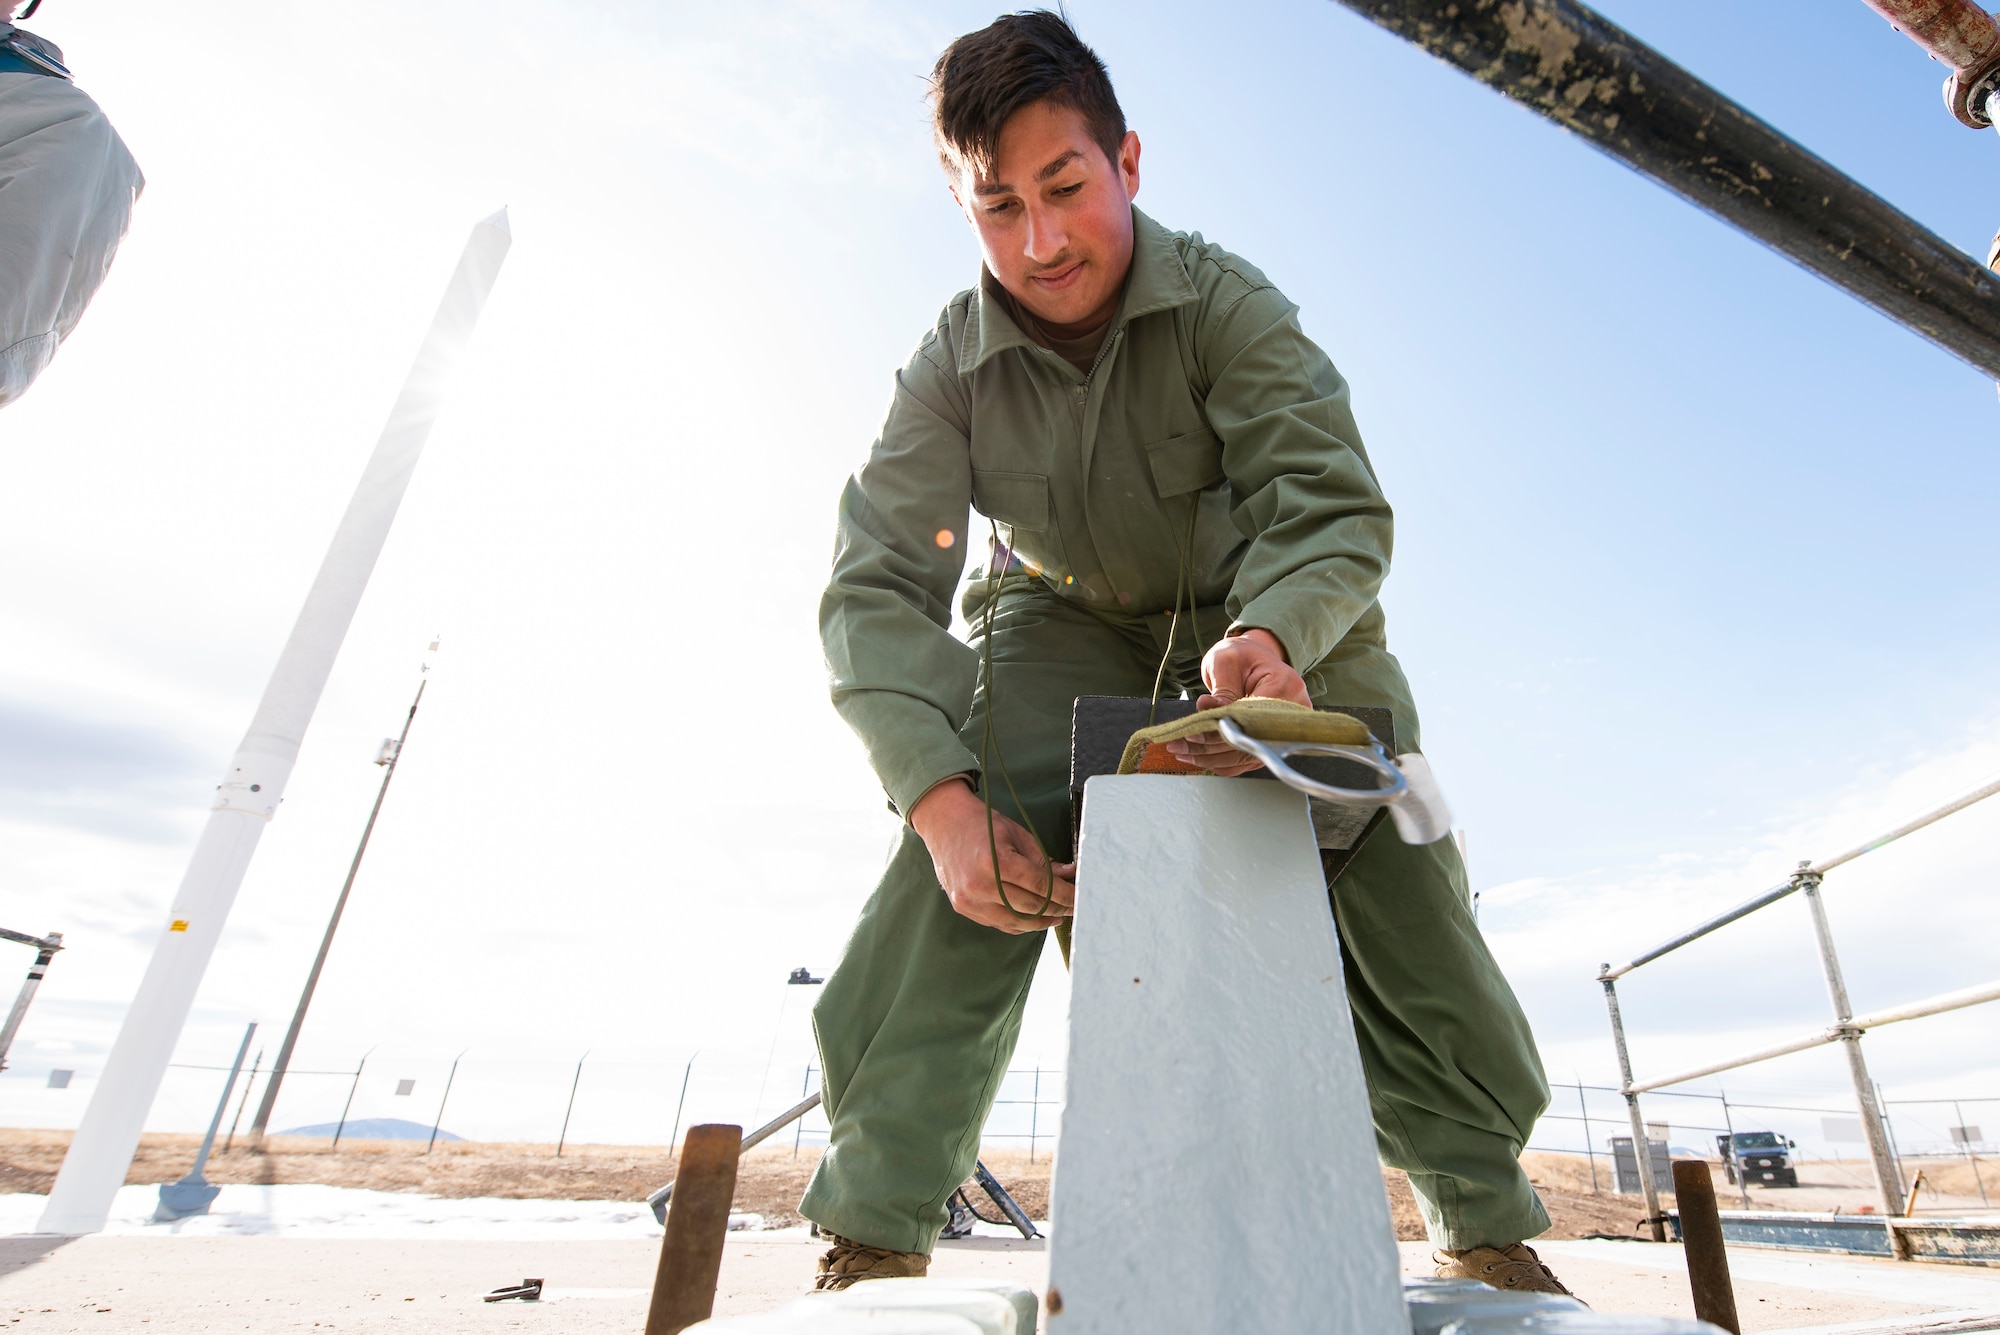 Airman 1st Class Emilio Gilliam, 341st Missile Maintenance Squadron missile maintenance trainee, performs topside maintenance of a launch facility March 27, 2021, near Malmstrom Air Force Base, Mont.